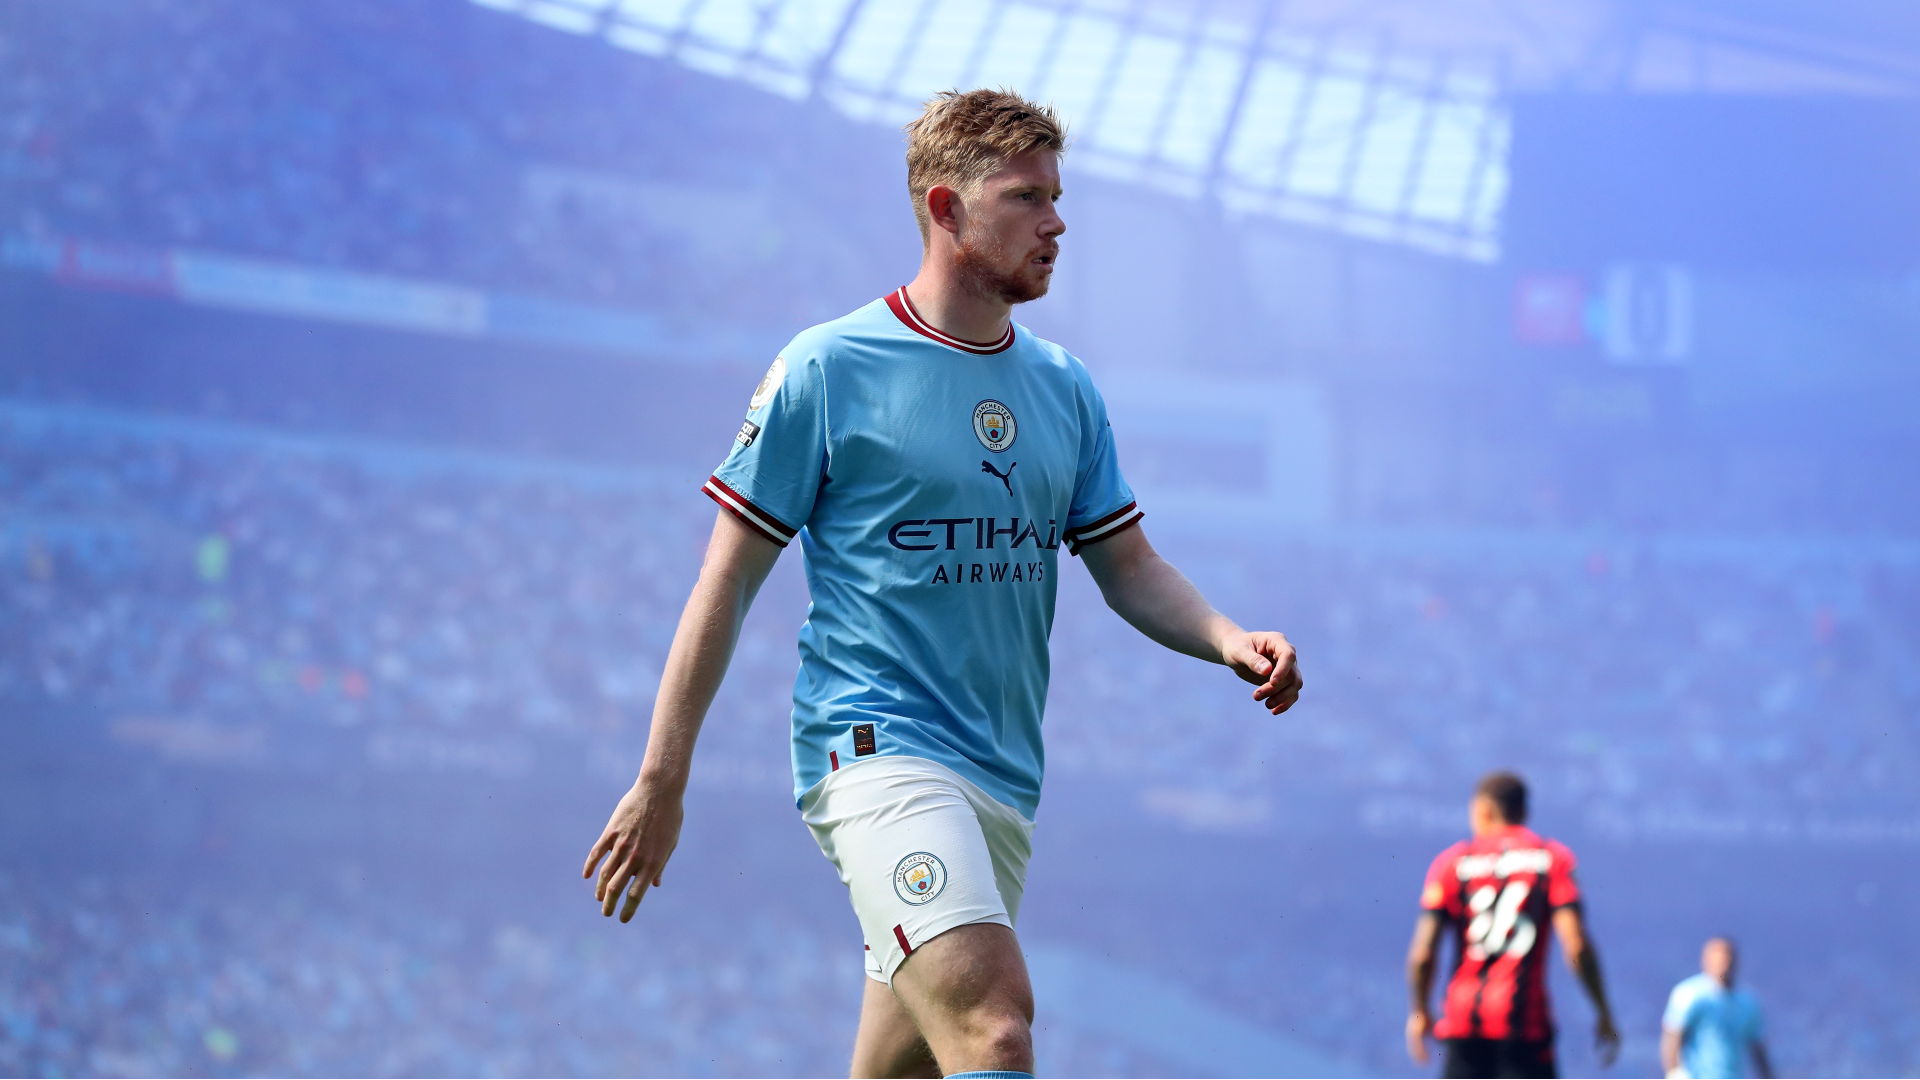 One to Watch: Kevin De Bruyne - The mastermind behind Man City's lethal  attack force set to sparkle in the Manchester derby | Goal.com India